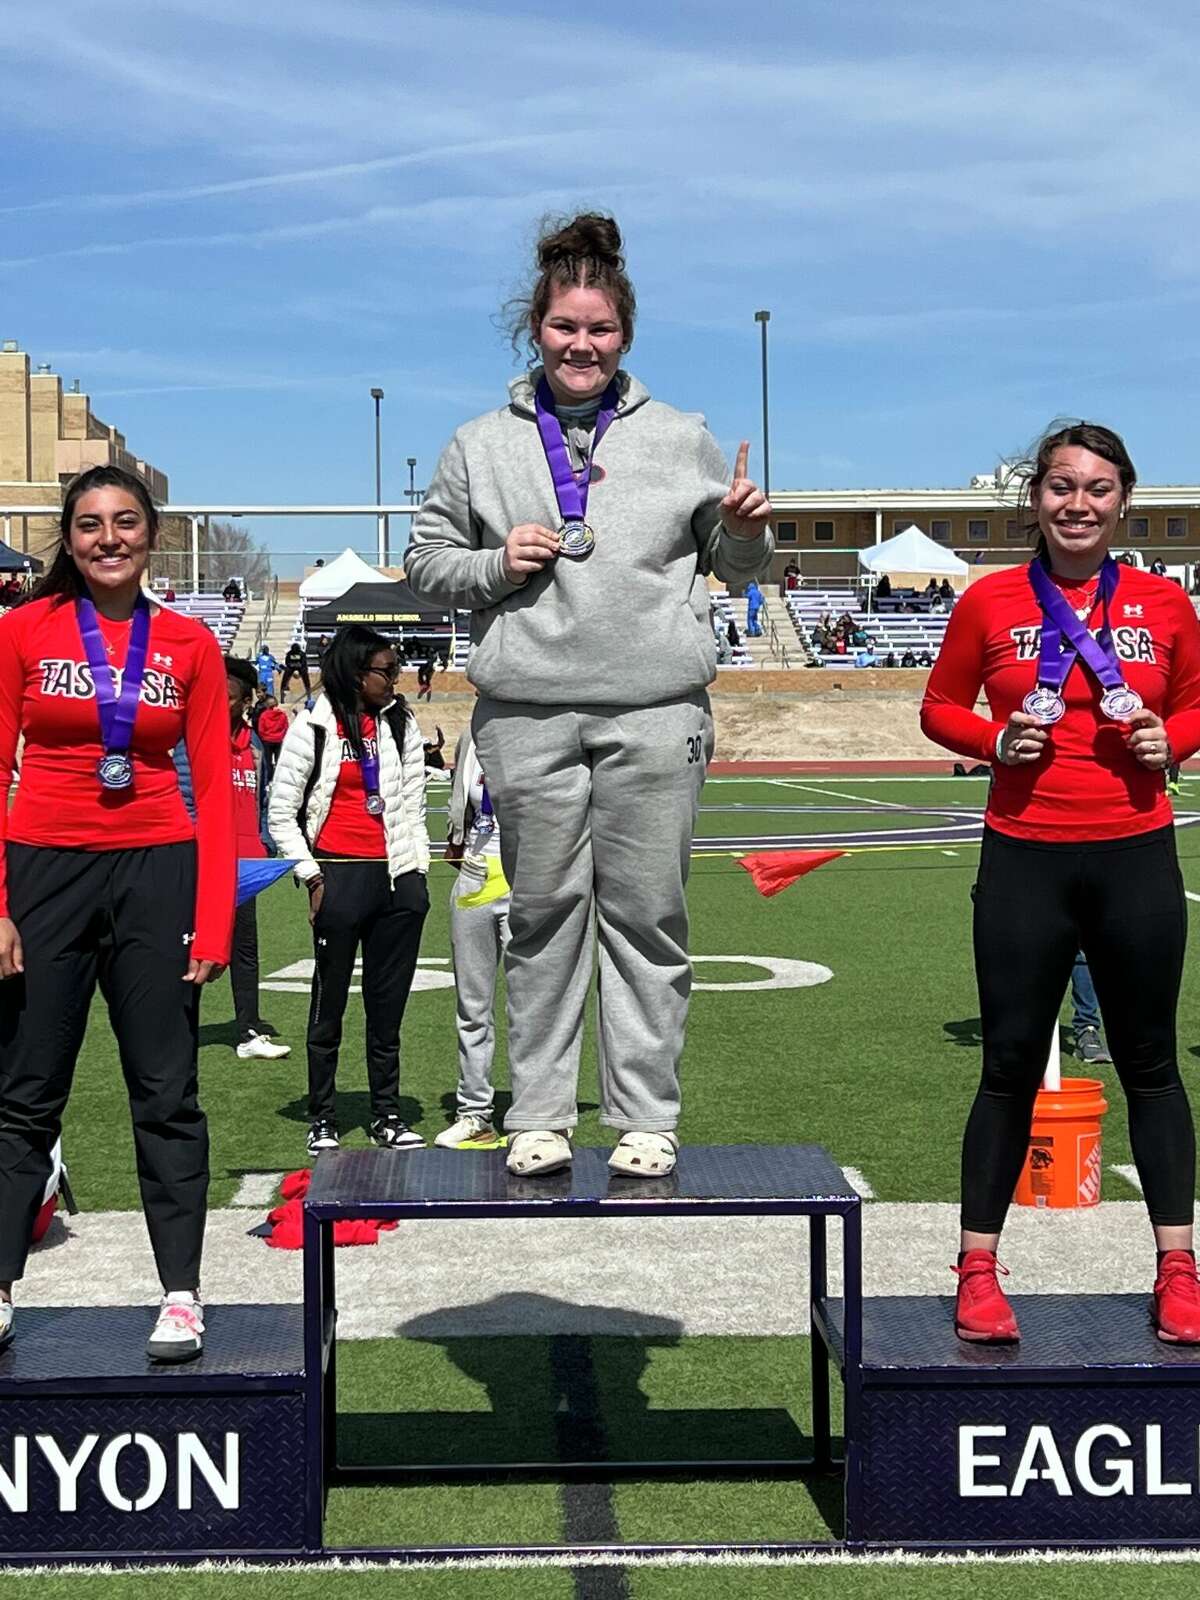 Rushing stood atop the podium at the Canyon Invitational after throwing 118’08 in the discus event.